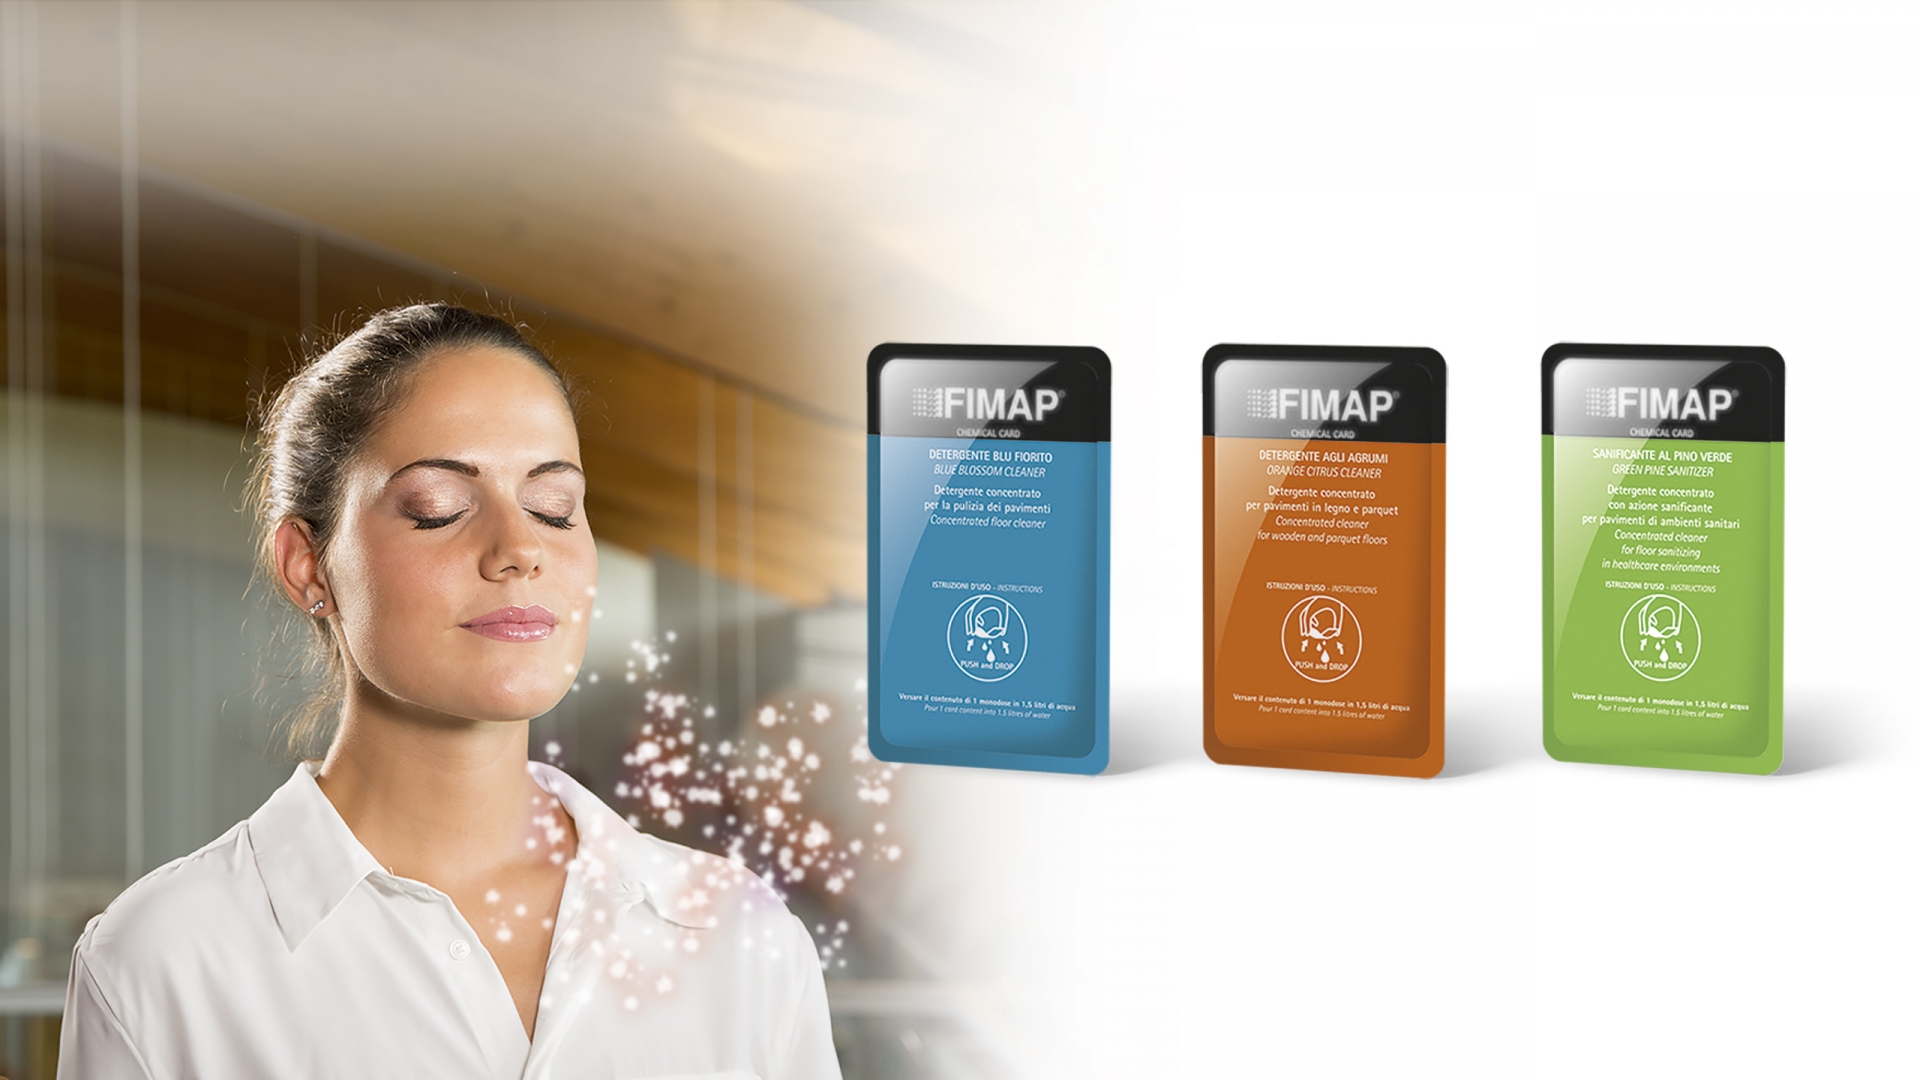 Enjoy the fresh scent of cleanliness - choose Fimap single-dose detergents